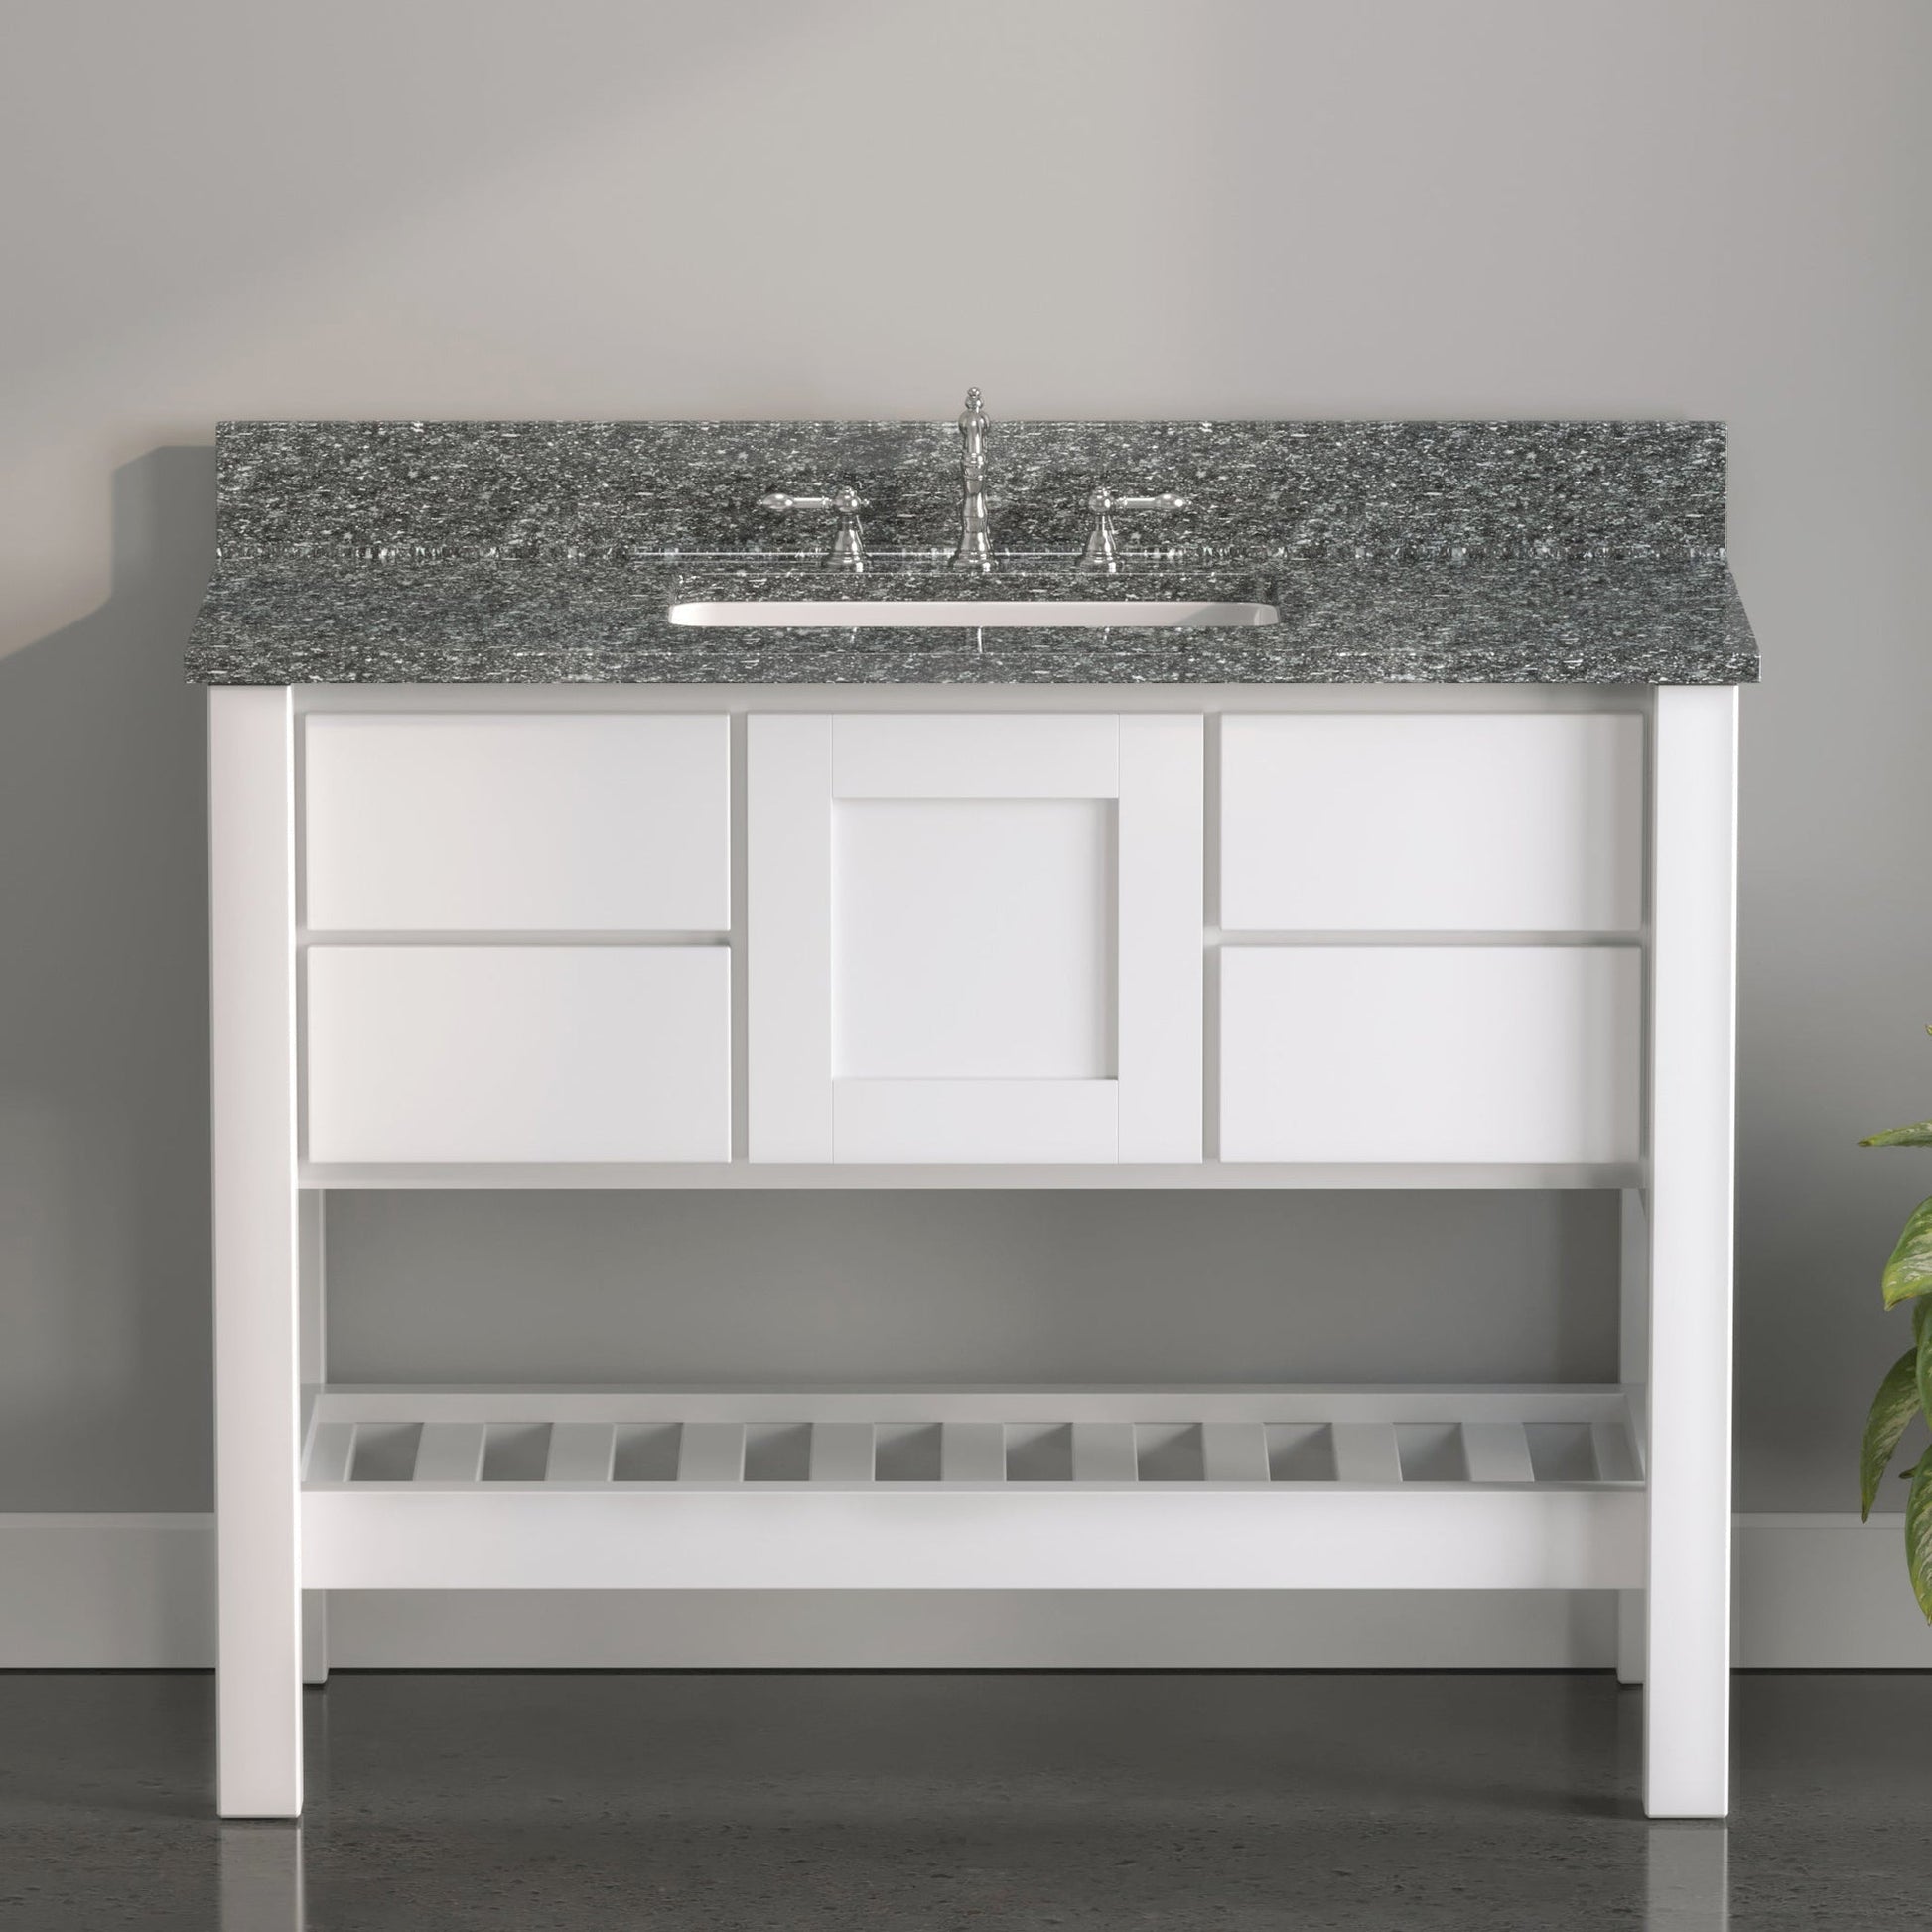 Cambridge Plumbing USA Patriot 48" White Solid Wood Single Bathroom Vanity With Starry Countertop Finish And Engineered Composite Countertop, Backsplash And Basin Sink